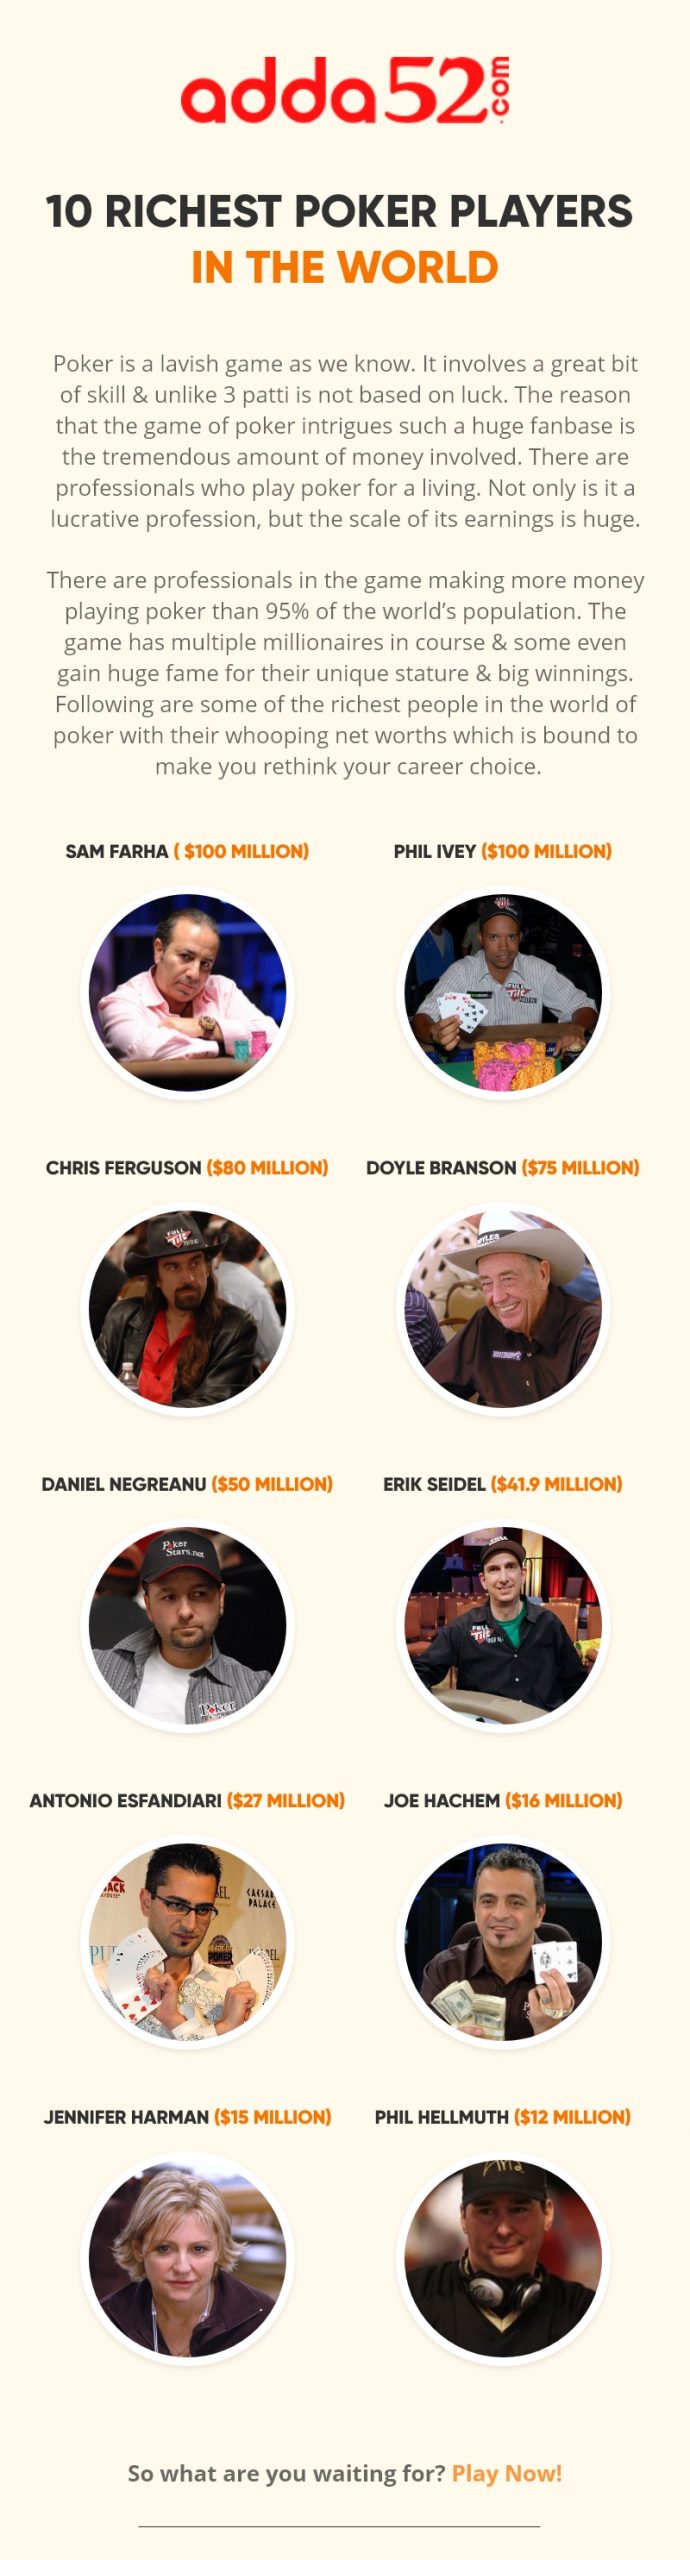 10 Richest Poker Players In The World